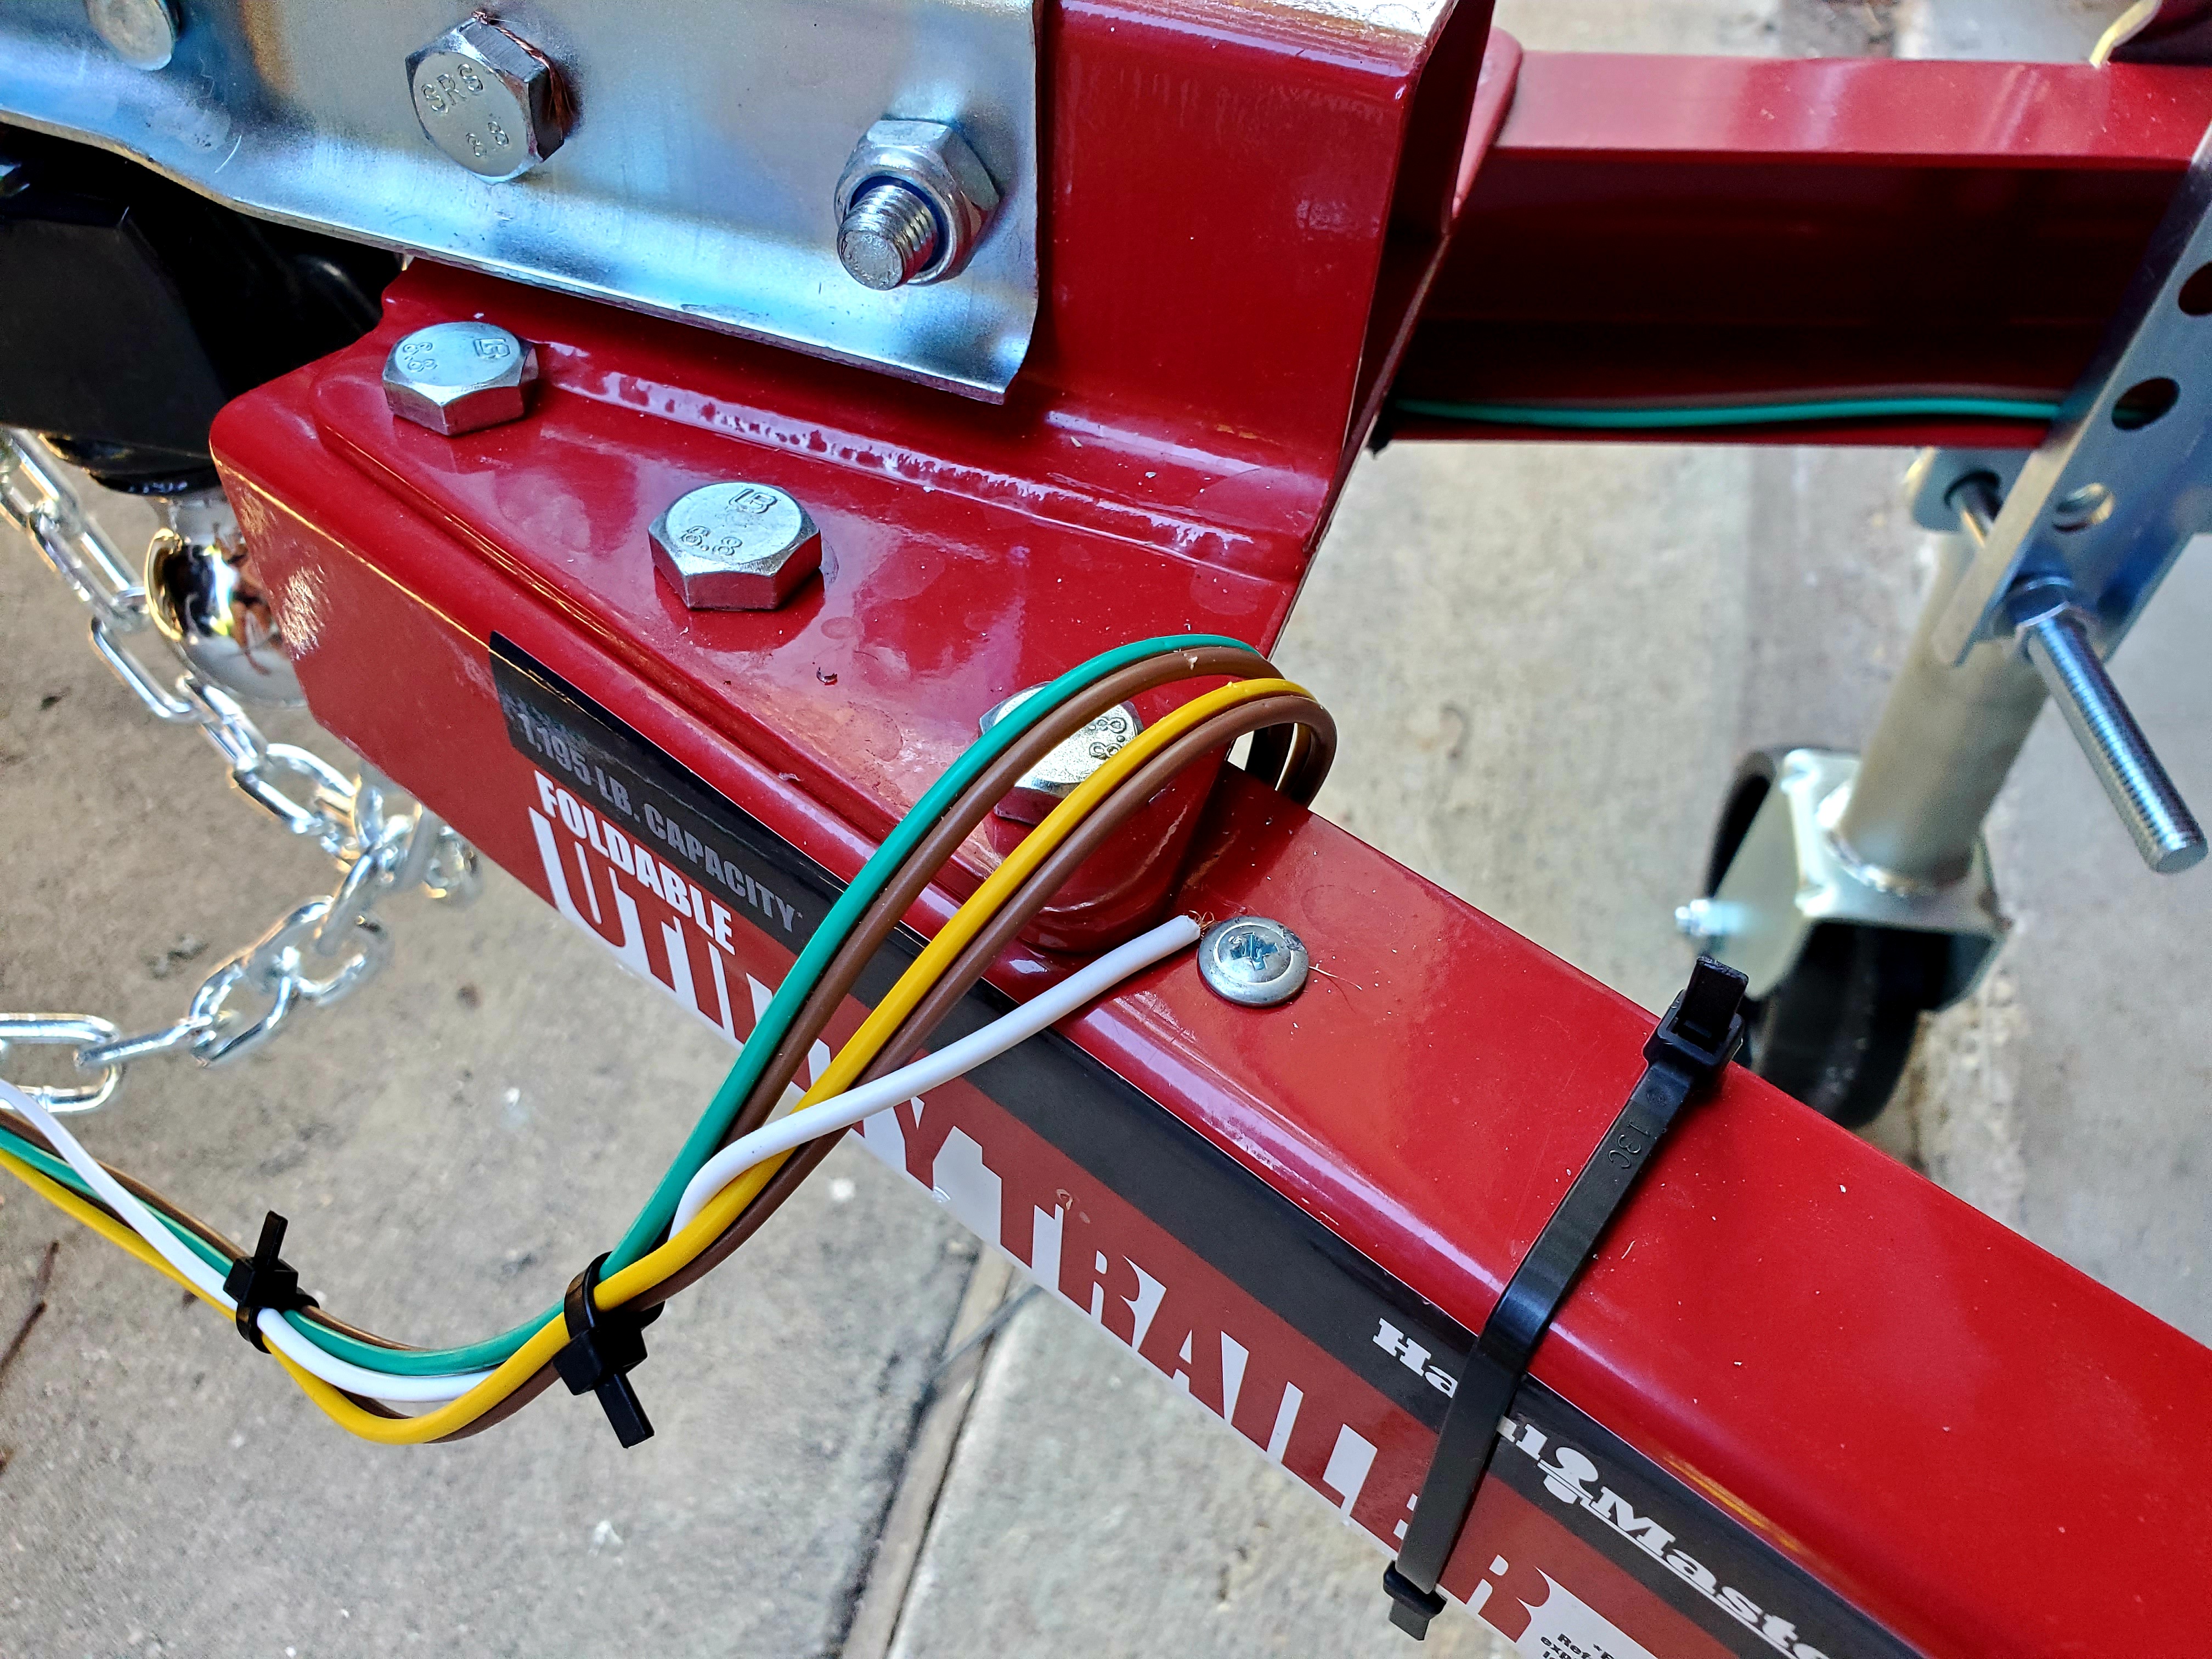 Wiring on a Harbor Freight Super Duty Folding Trailer from Harbor Freight in the garage